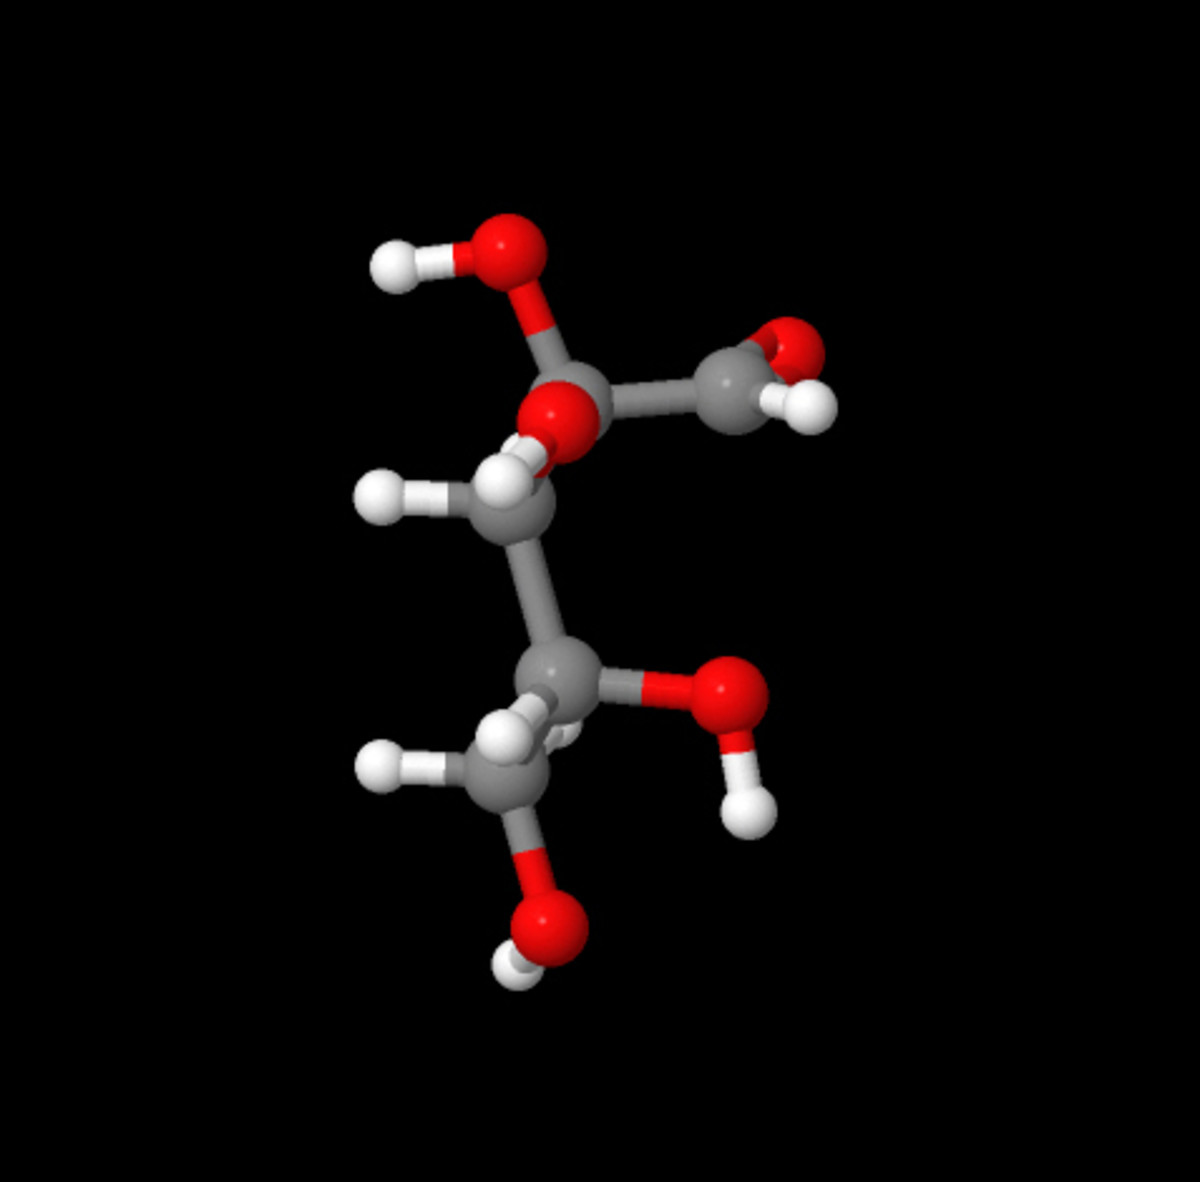 D-Ribose Molecular Structure 3D (the image taken from ChemSpider.com)